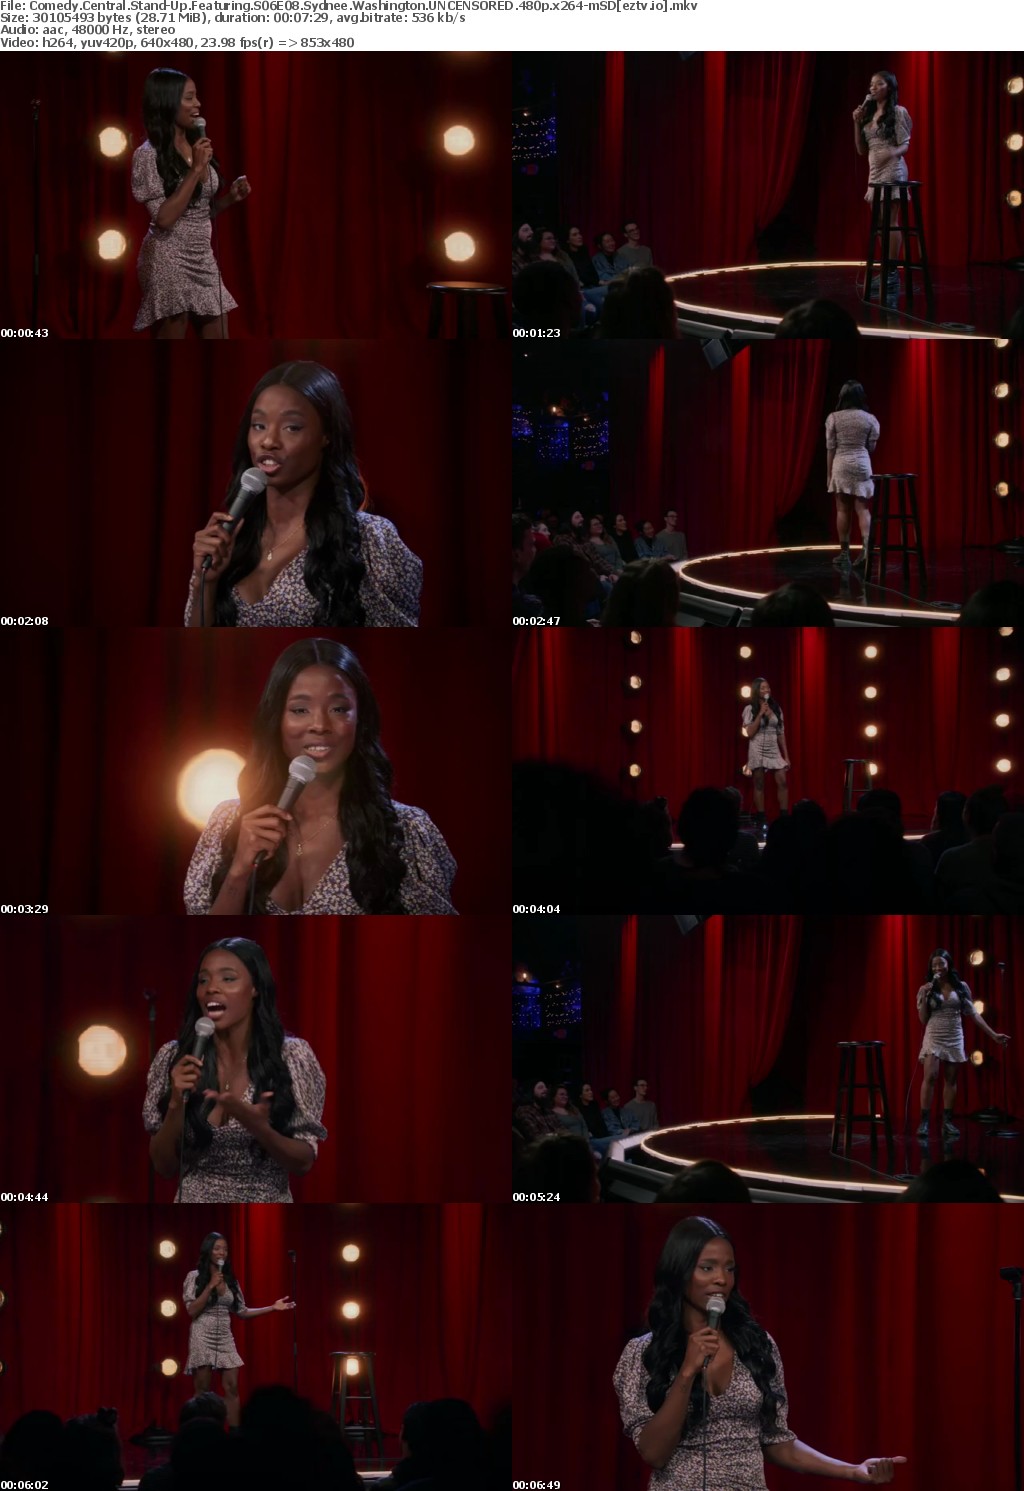 Comedy Central Stand-Up Featuring S06E08 Sydnee Washington UNCENSORED 480p x264-mSD